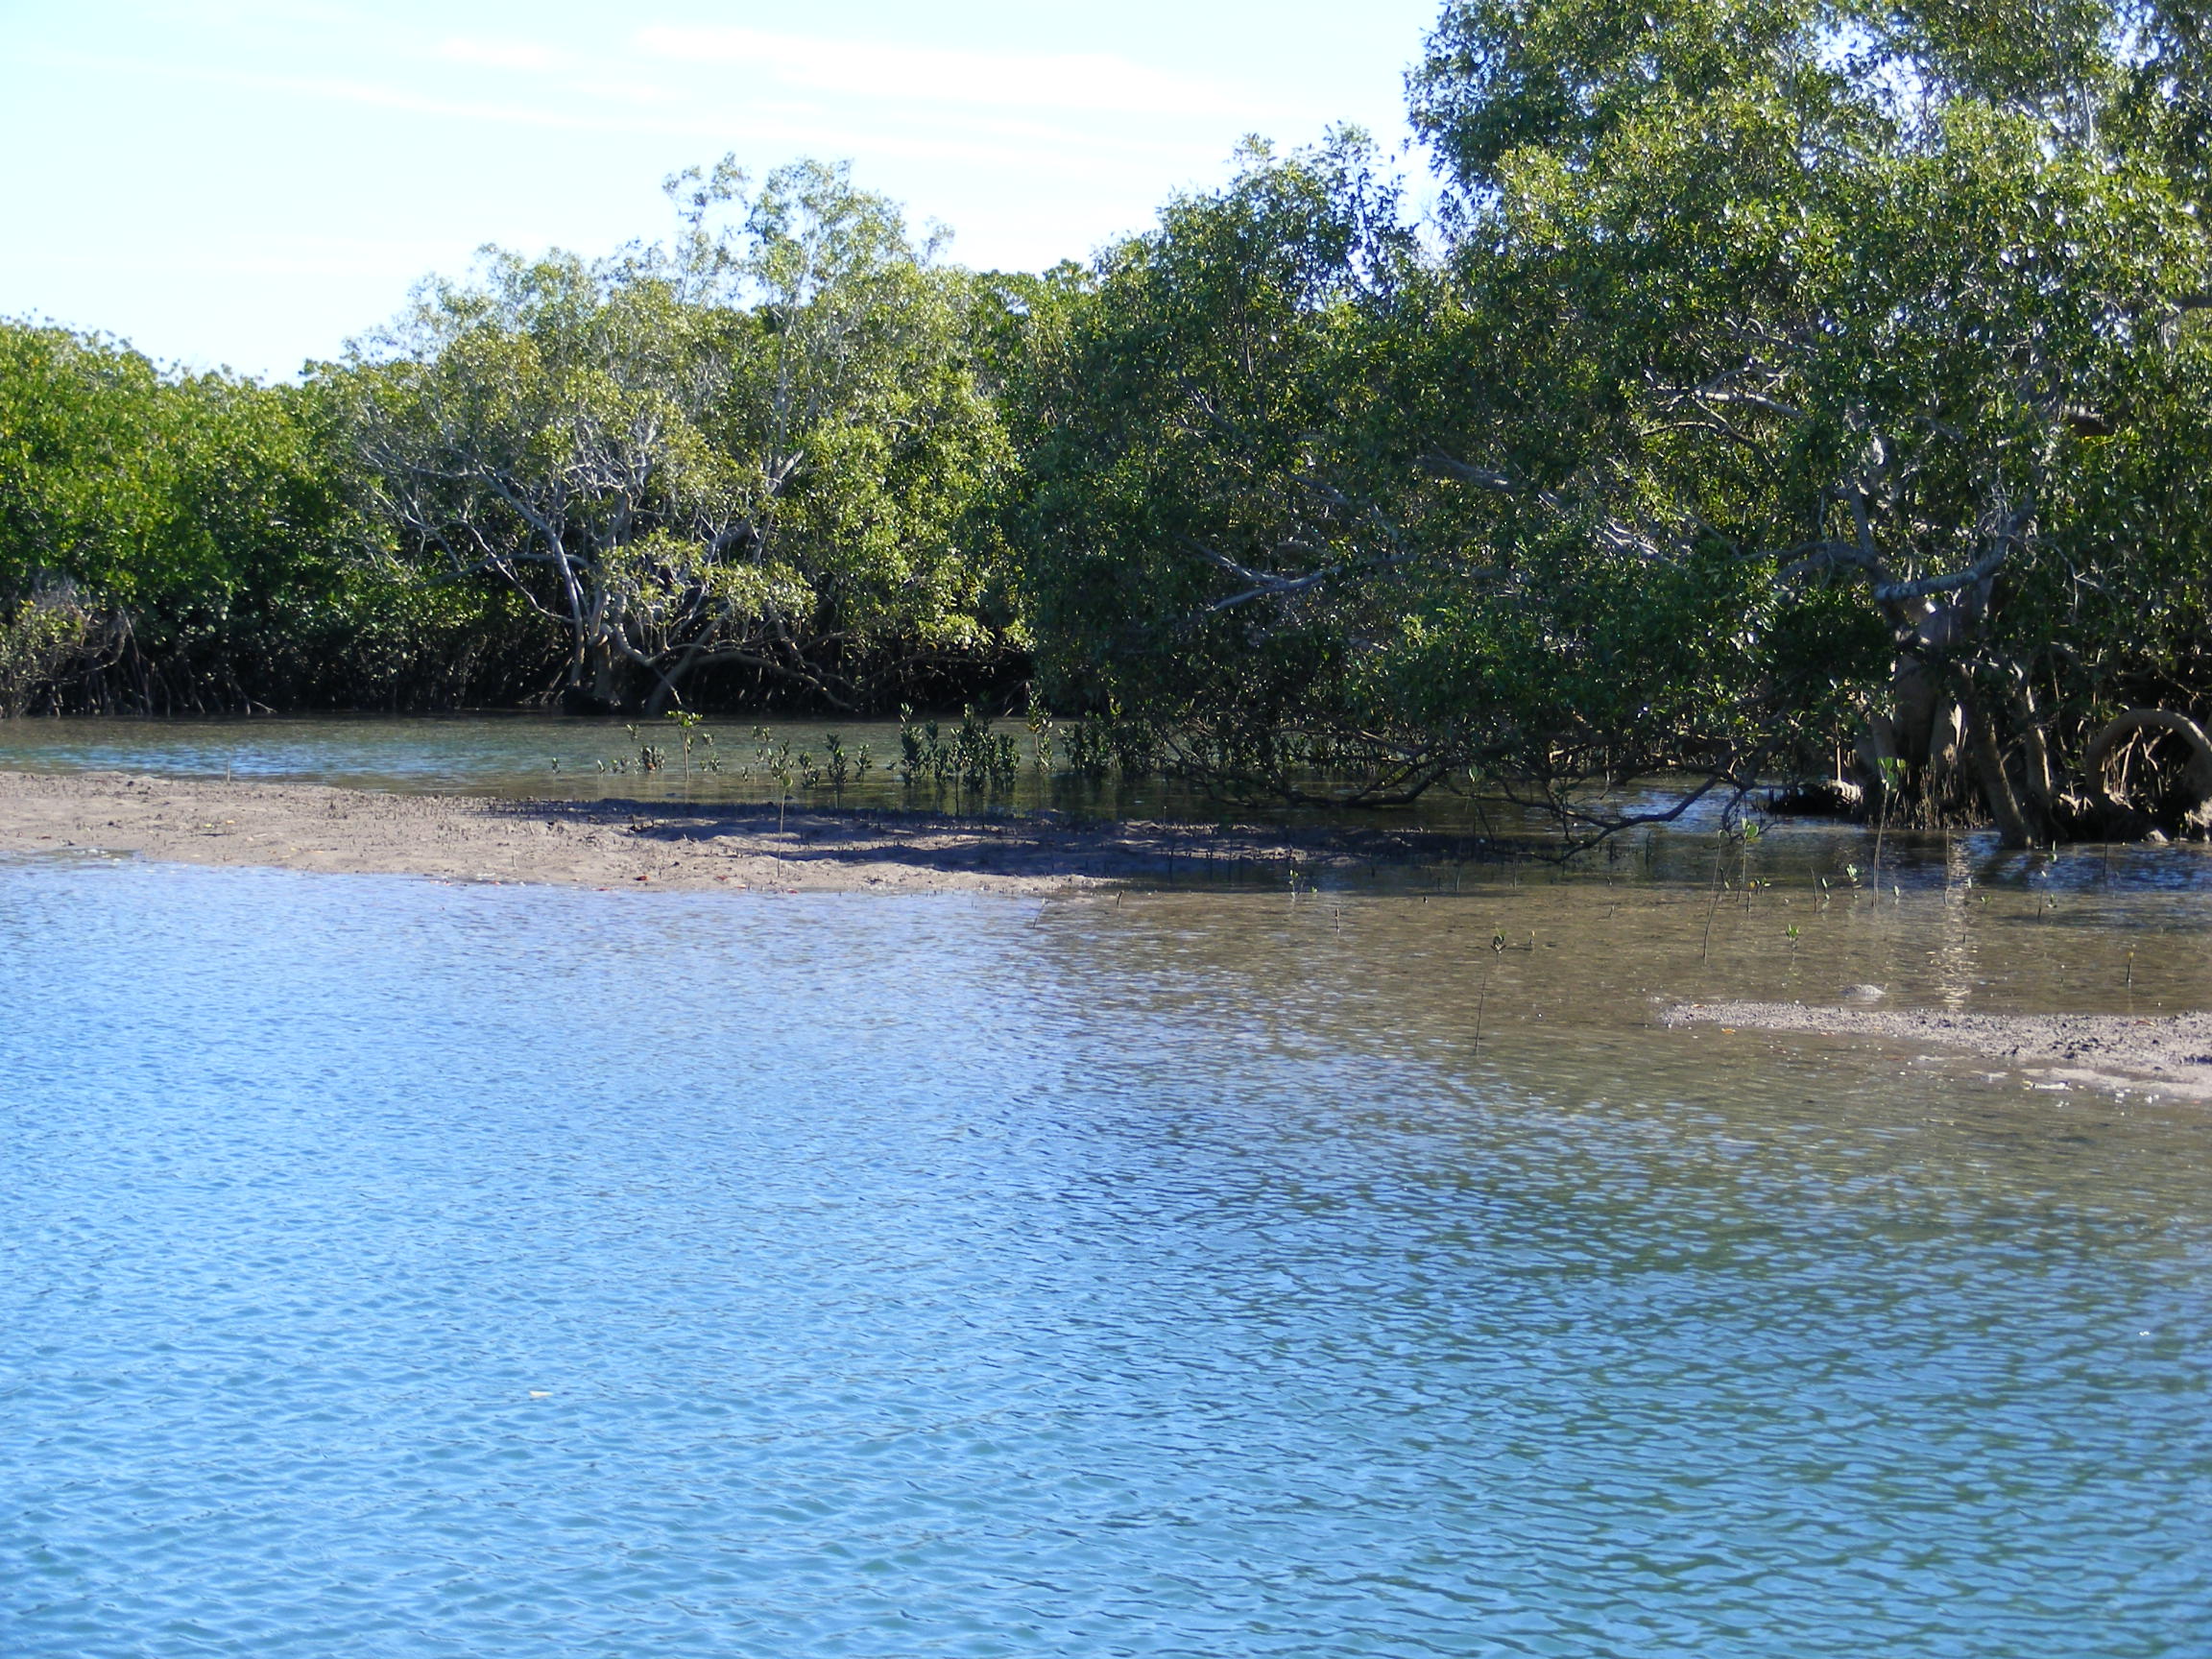 Avicennia-dominated mangrove forest. Photo by Natalie Kastner, Queensland Government